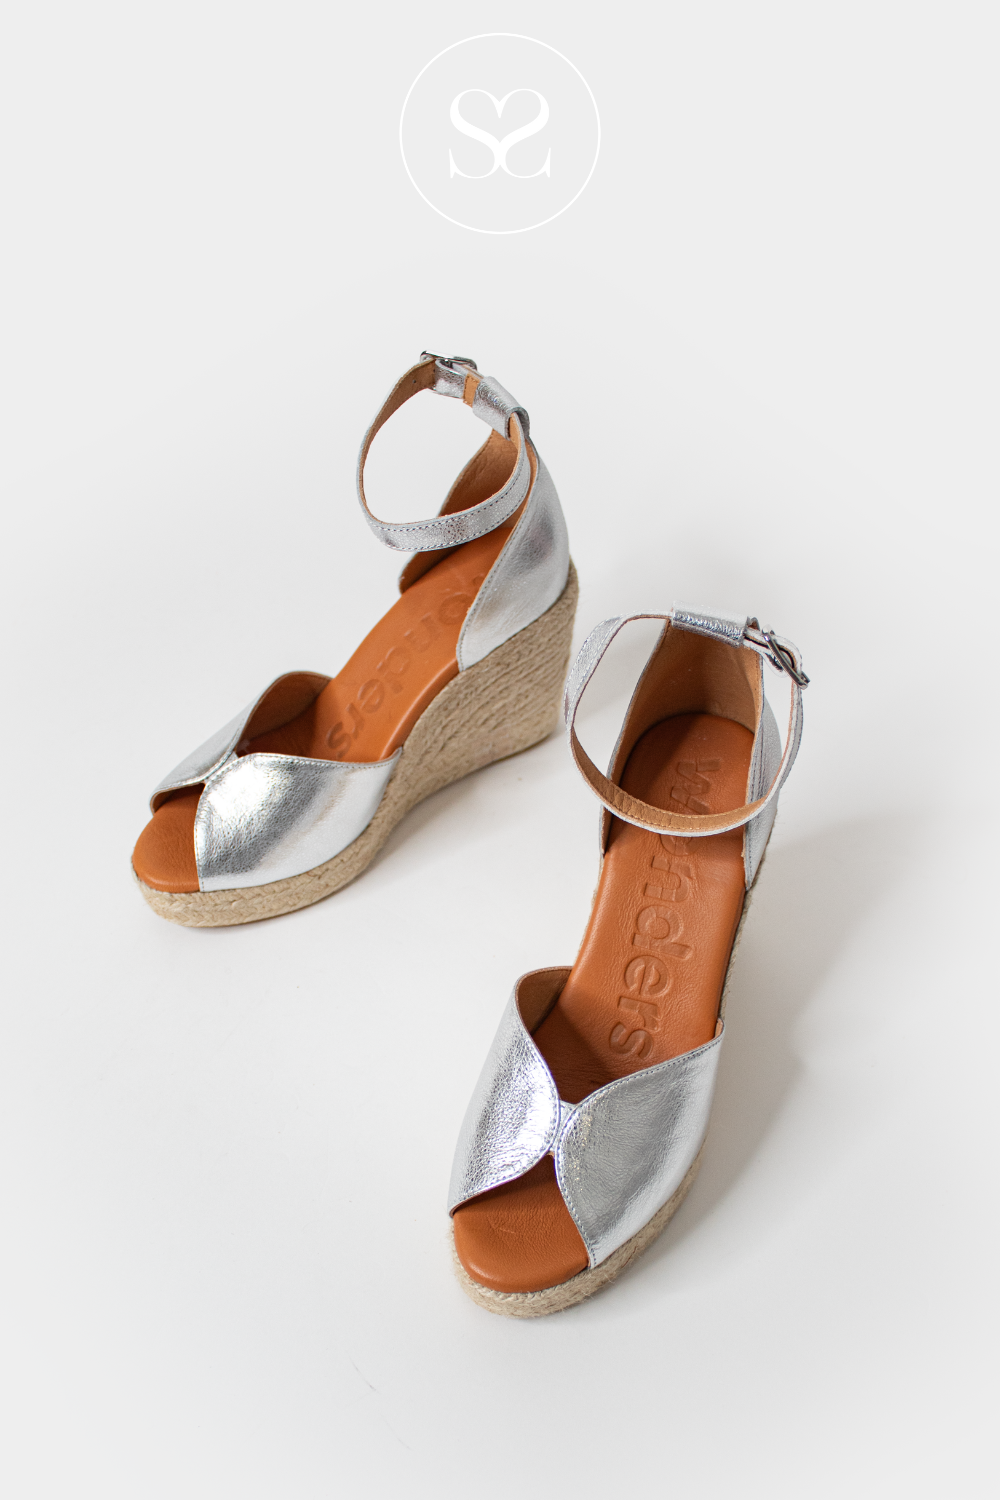 WONDERS YH-PI609 SILVER LEATHER WEDGE SUMMER SANDALS